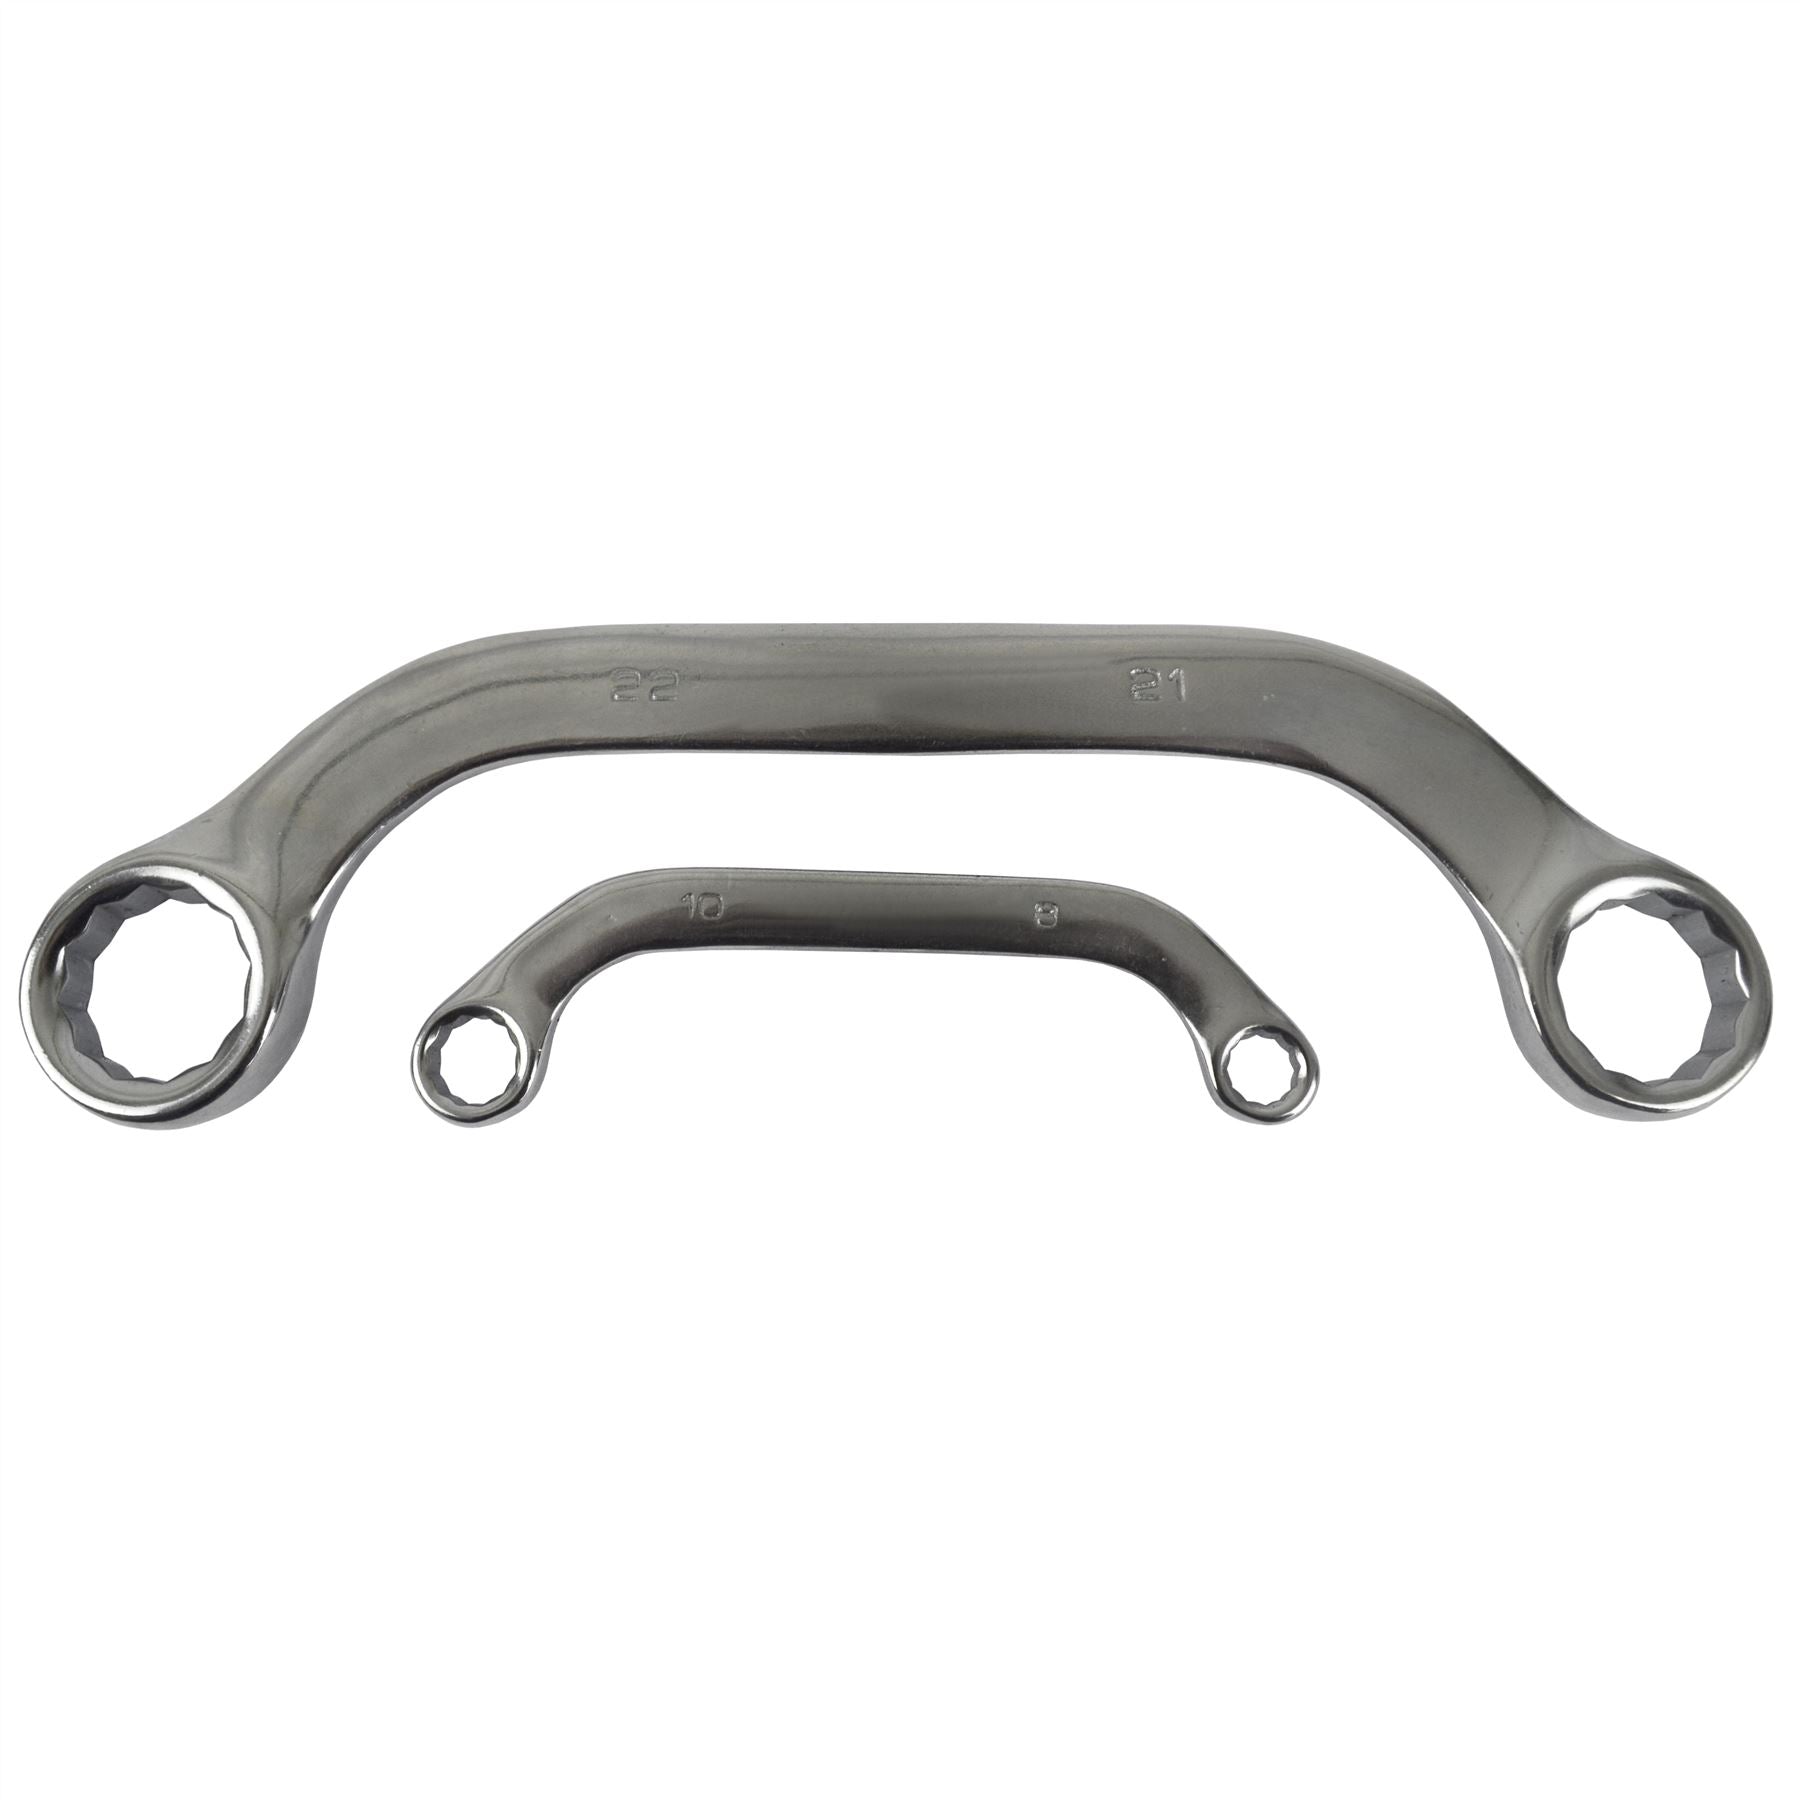 Half Moon Ring Spanners Metric Sizes 8-22mm Obstruction Bend C Wrench SIL291